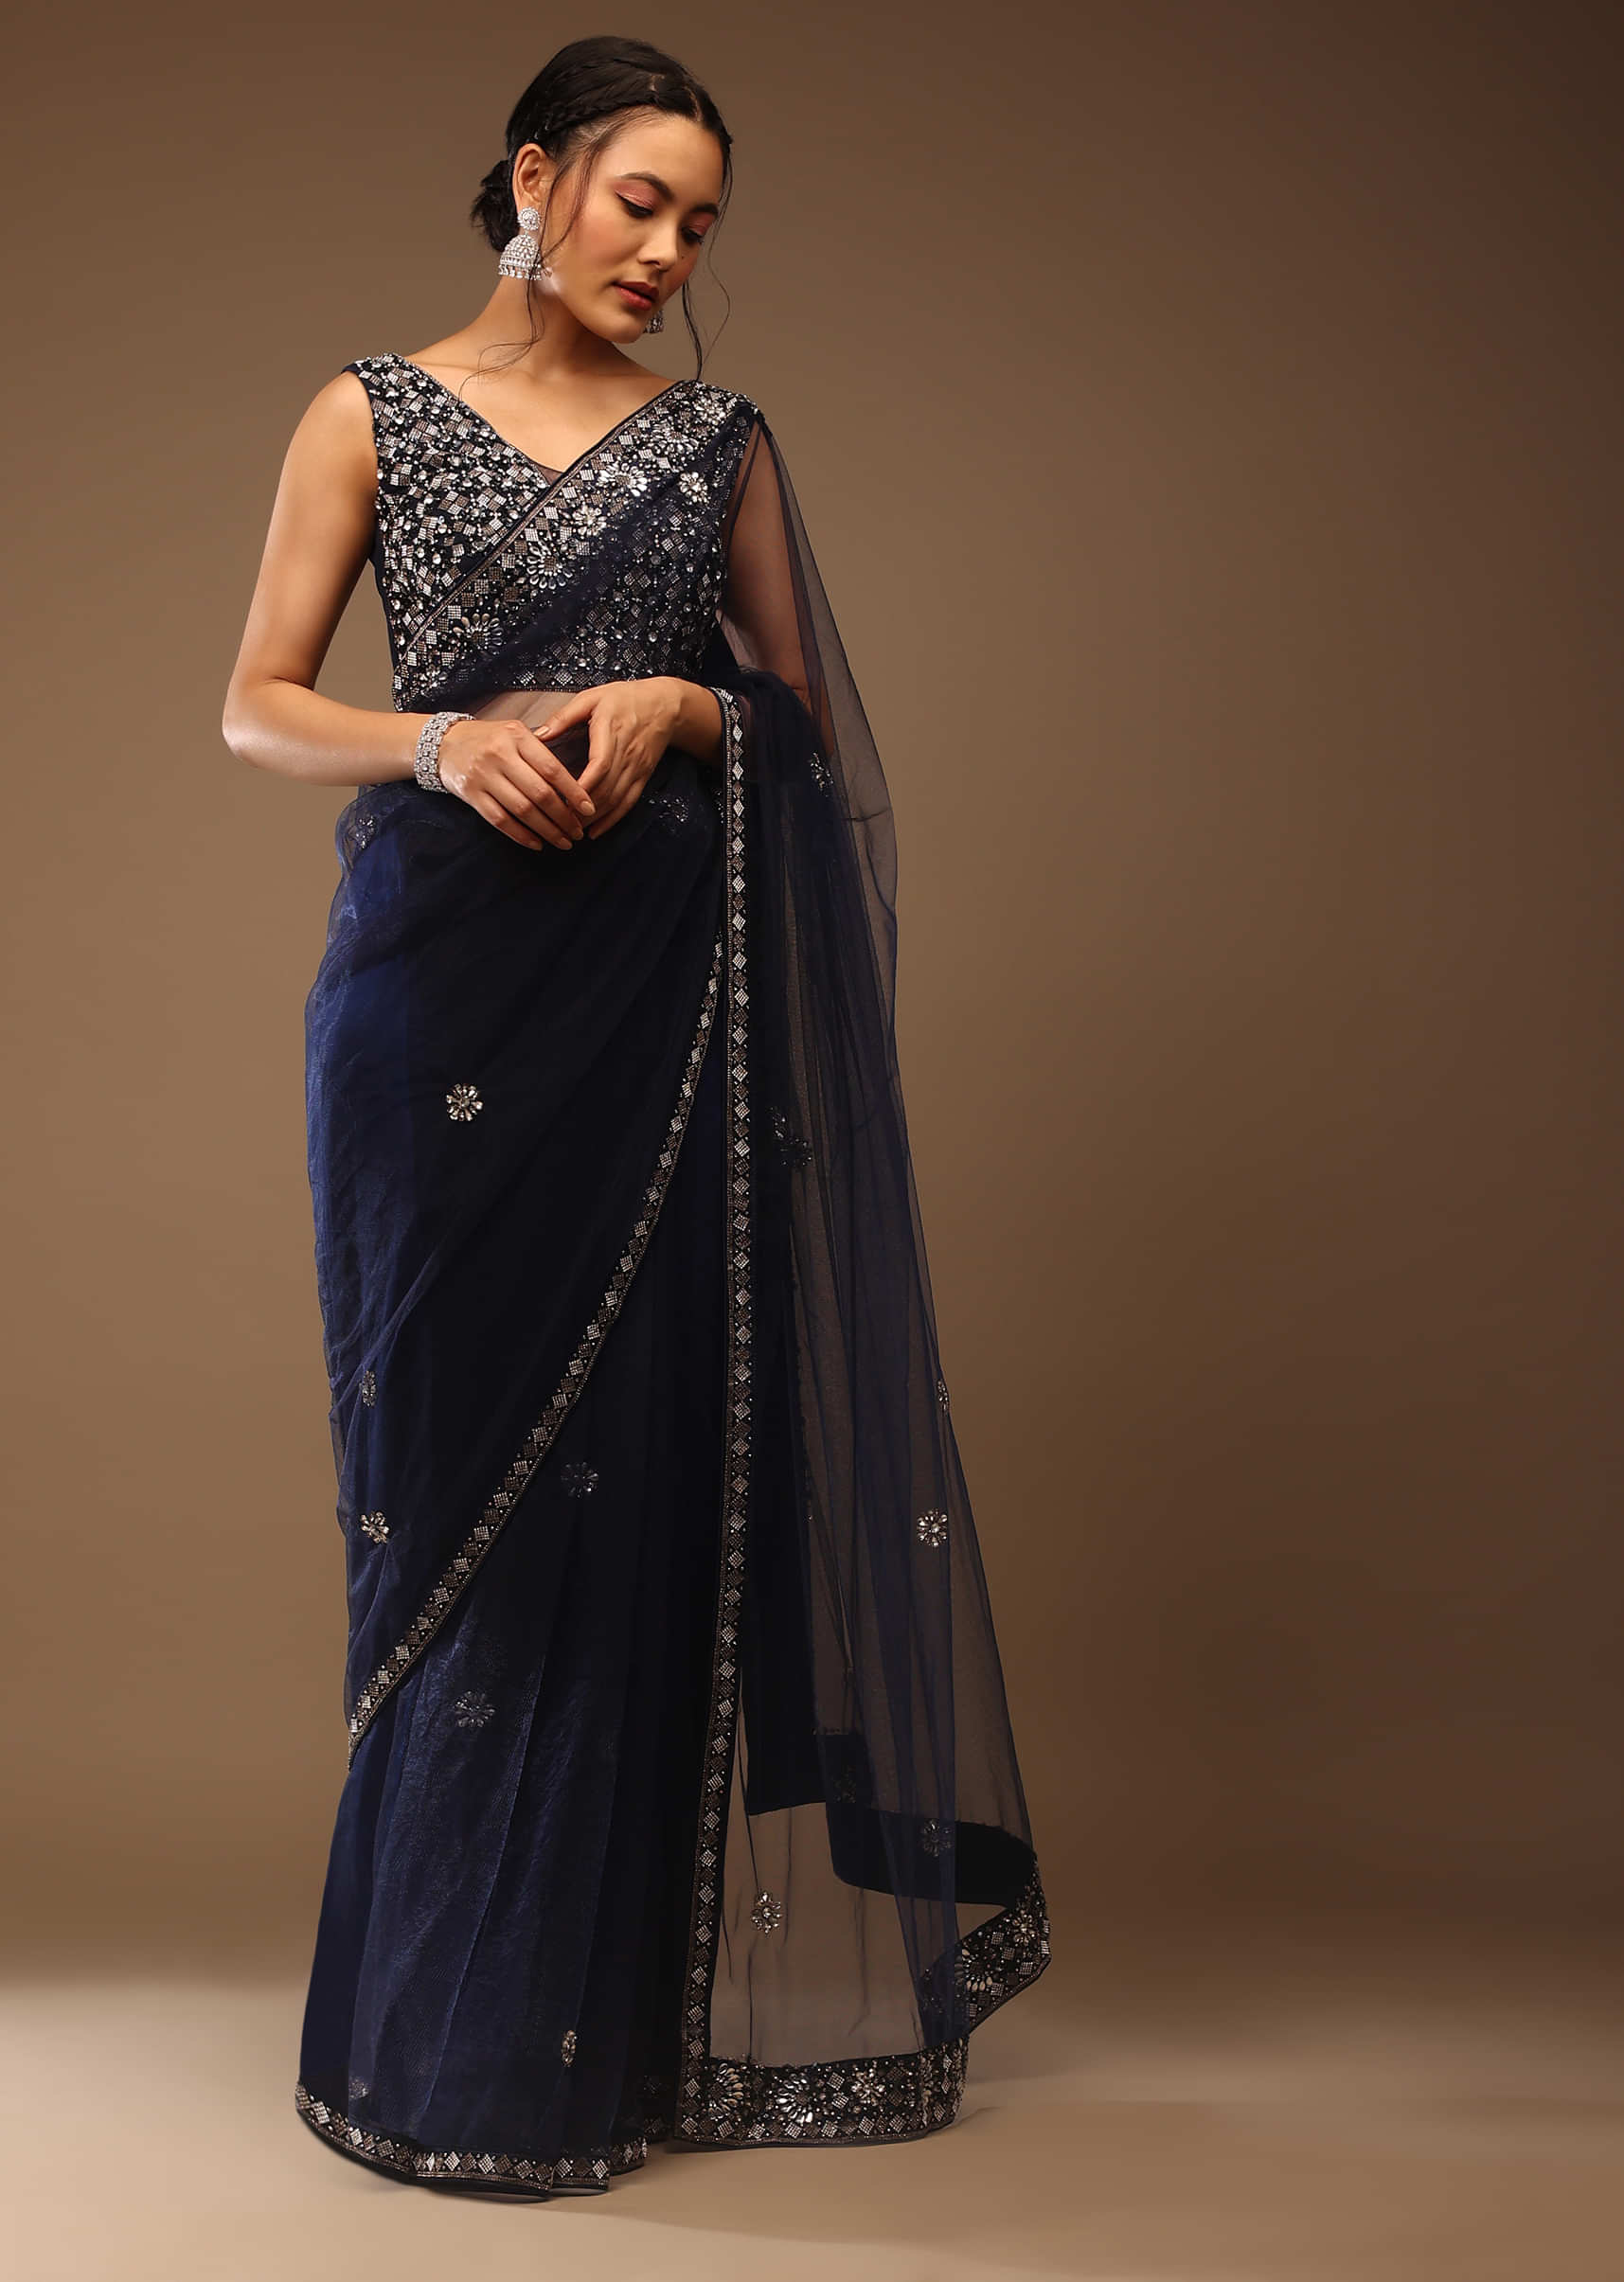 Heavy Embroidery Saree for Wedding 2022 | New Fancy Bridal Saree